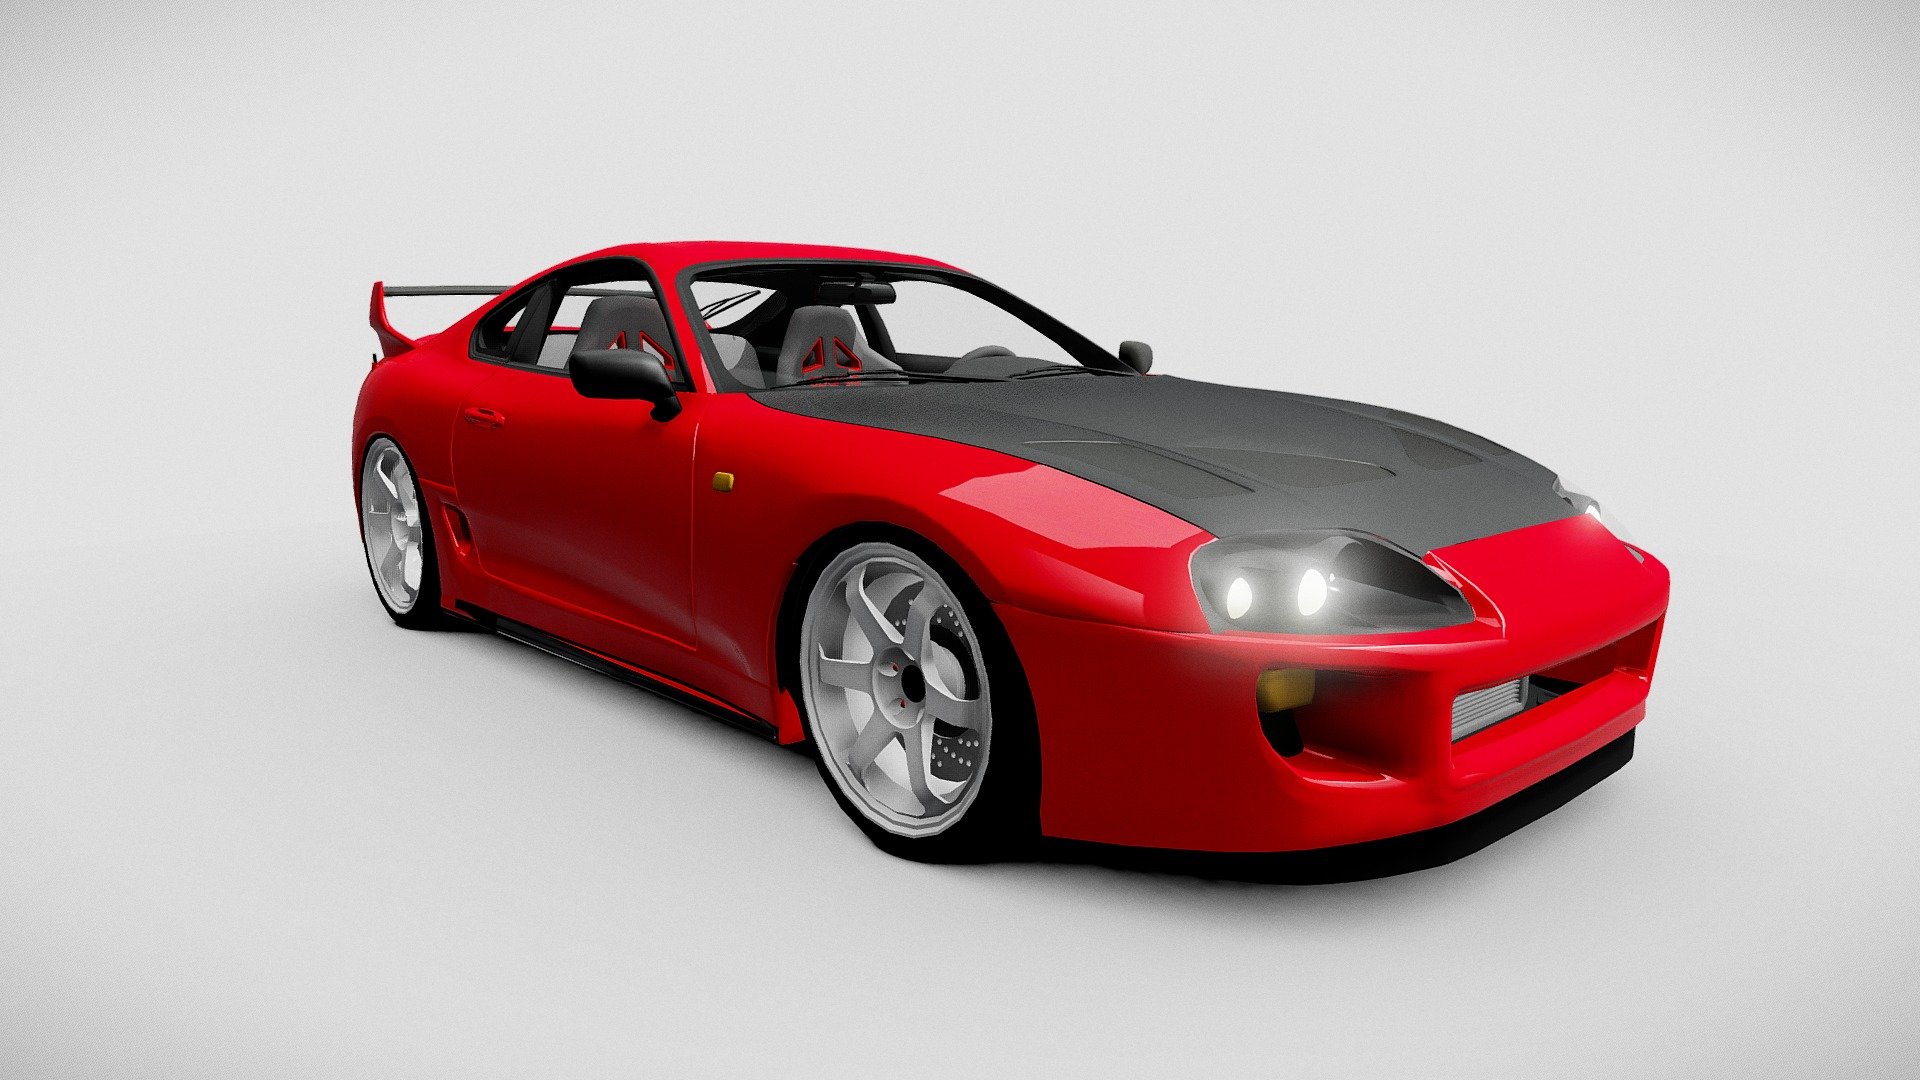 So, This is a Upcoming model for my Game Race Force.
I just wanna show y'all how it looks.
Based on my guess everyone wanna see a supra for sure 3d model